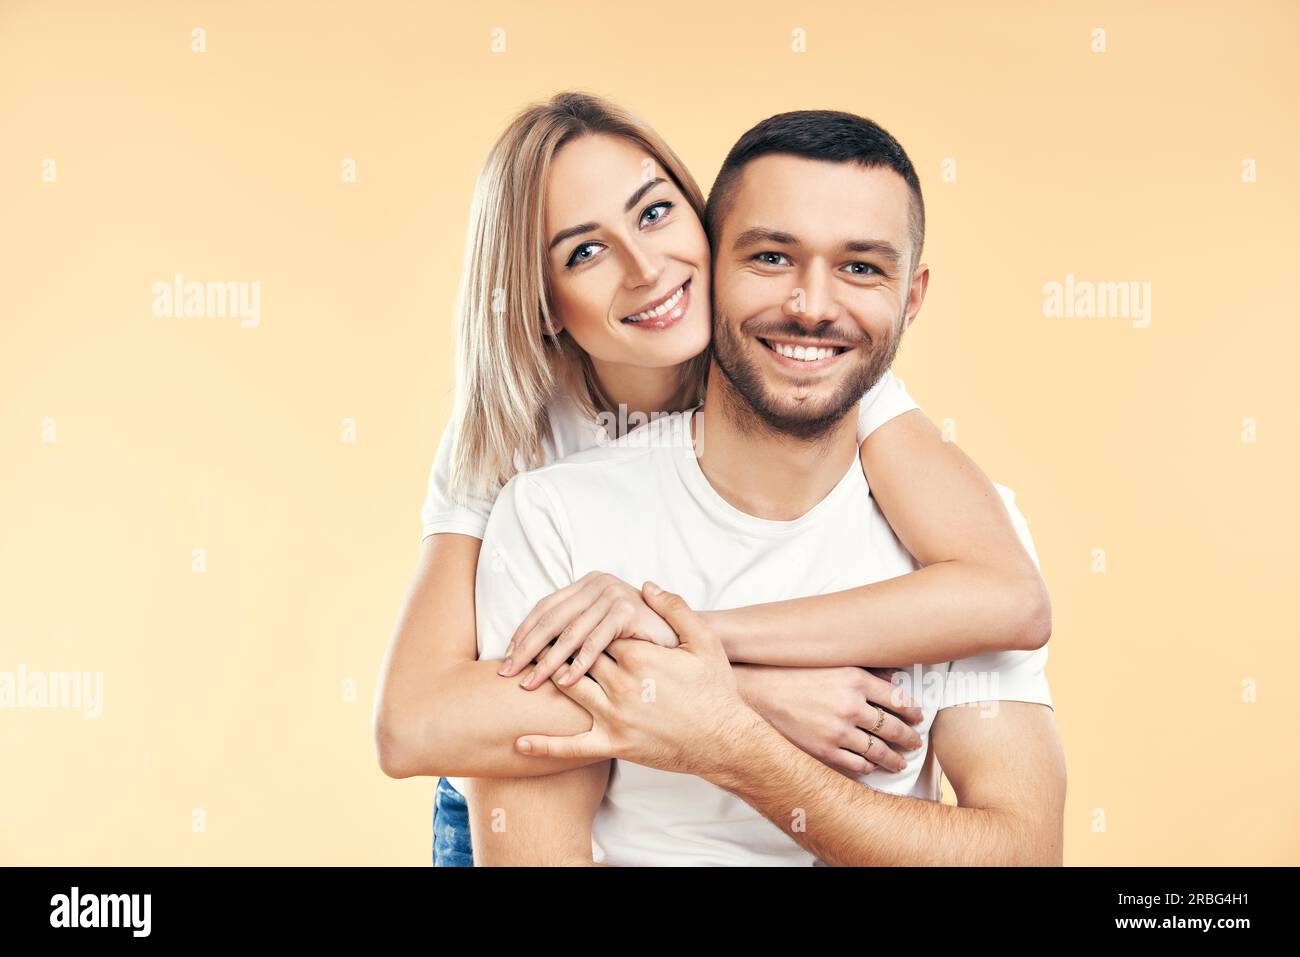 Happy smiling couple in love on beige background. Man carrying his girlfriend piggyback. Love, romance, fun concept Stock Photo